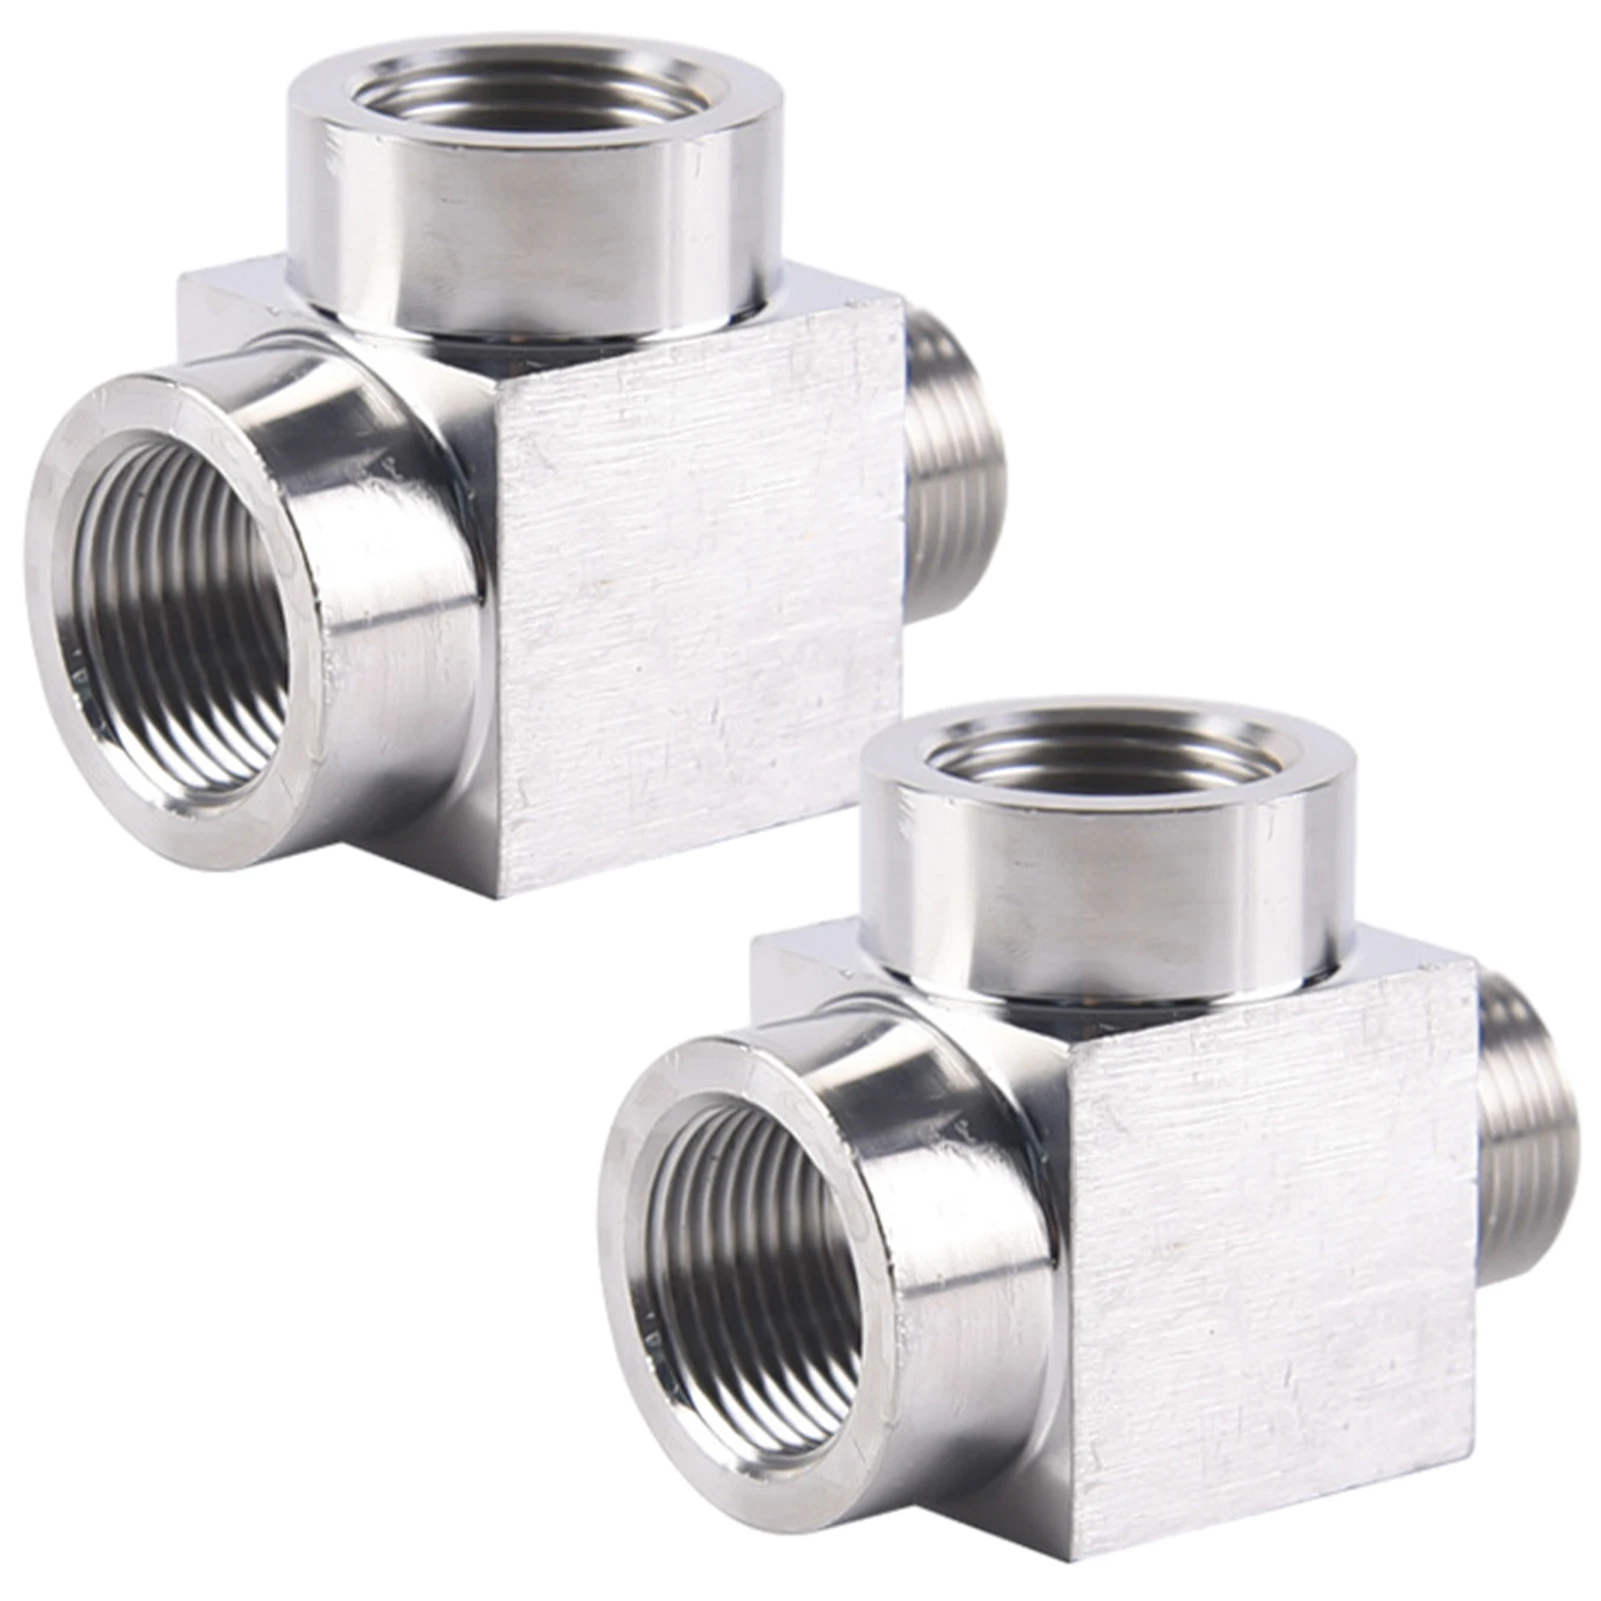 

2pcs Smooth Watering Safe Strong Connection Gardening Polishing Farm Tee Pipe Fittings Thickened Design Reliable Stainless Steel